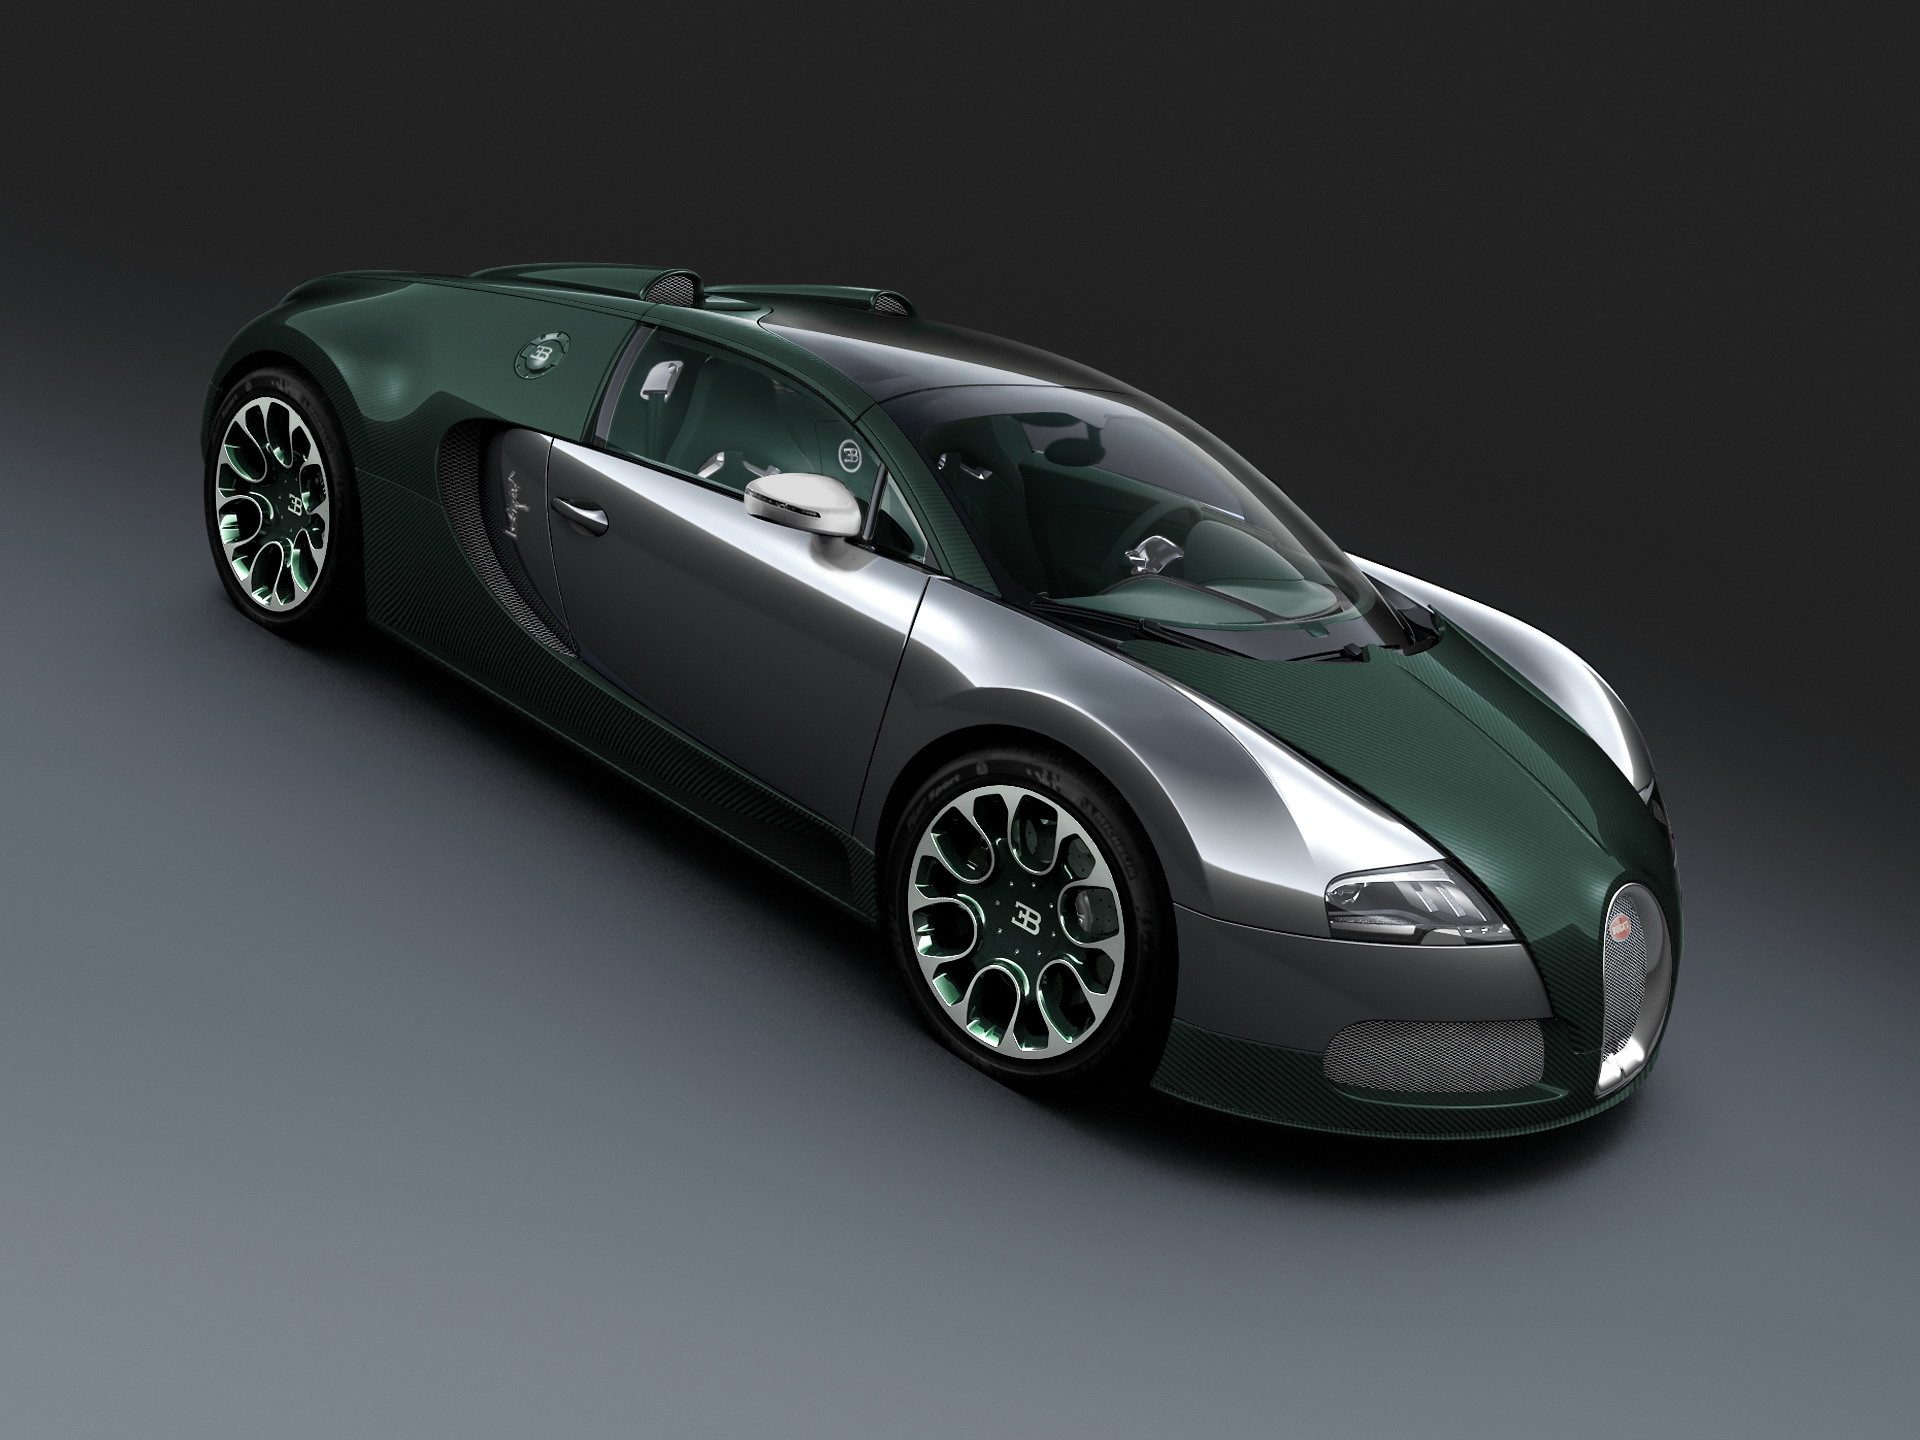 1920x1440 Download. 2013 Bugatti Veyron 16.4 Grand Sport Green Carbon Pictures, ...